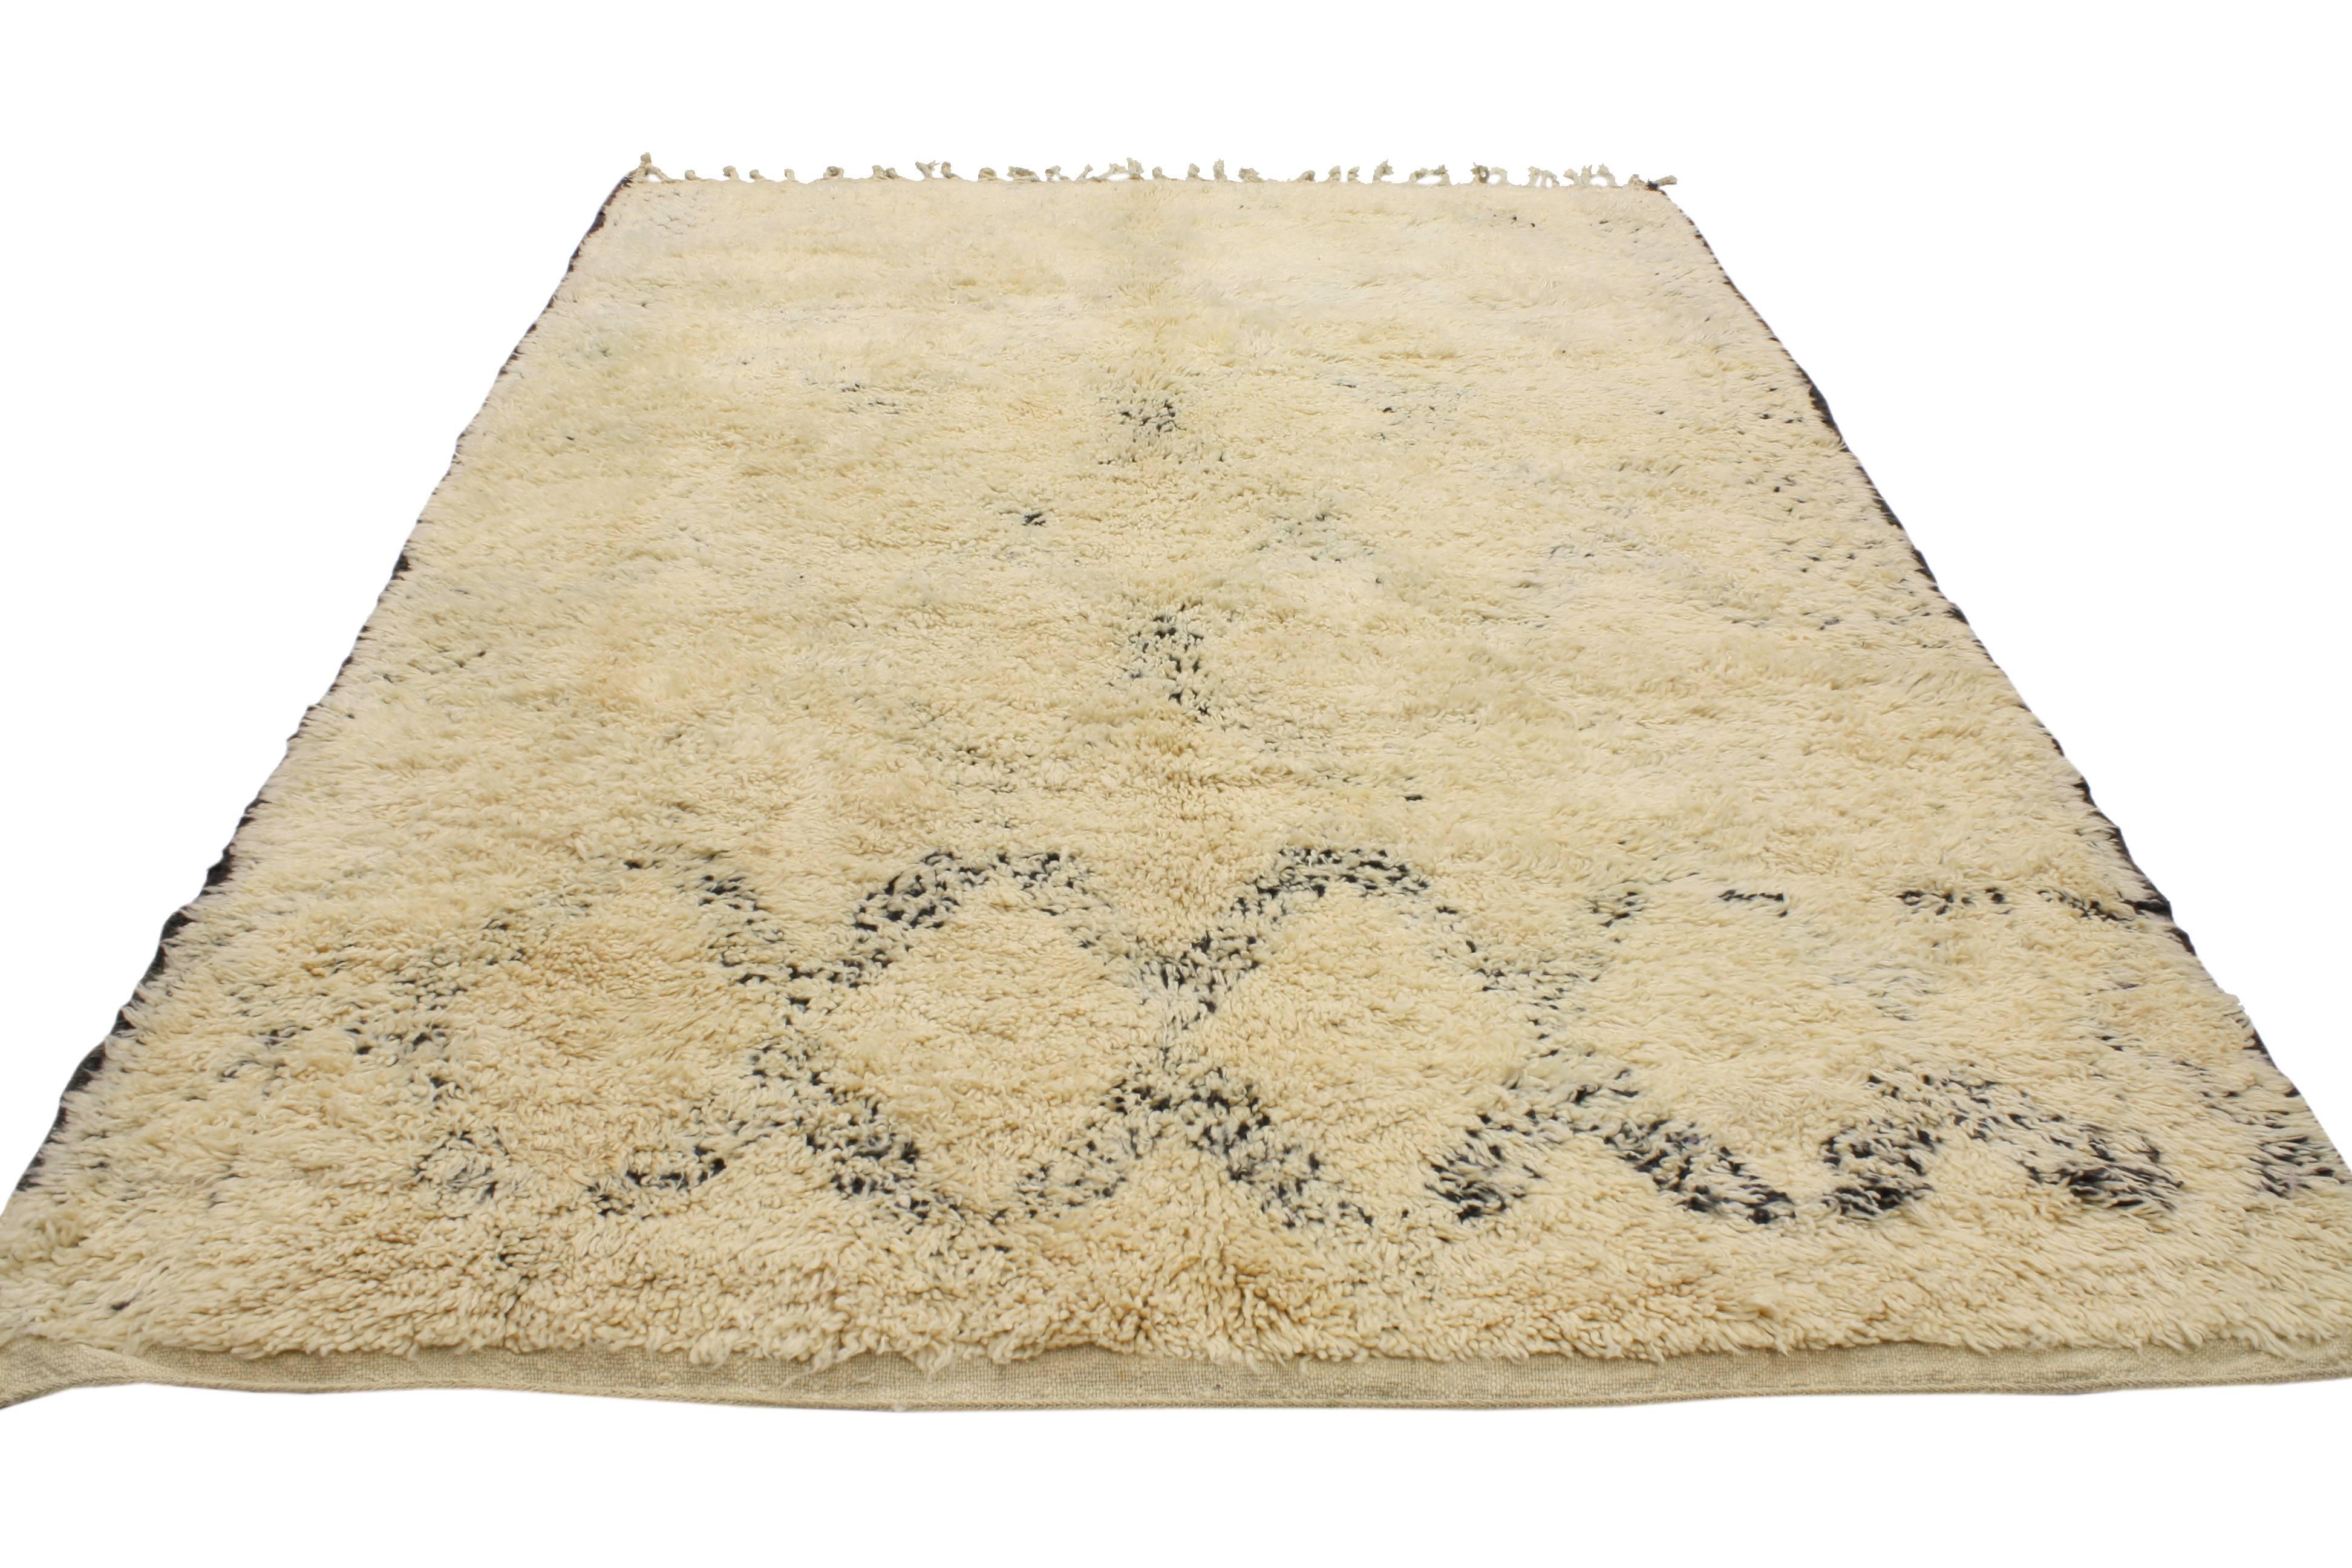 Hand-Knotted Vintage Beni Mguild Moroccan Rug with Mid-Century Modern Style